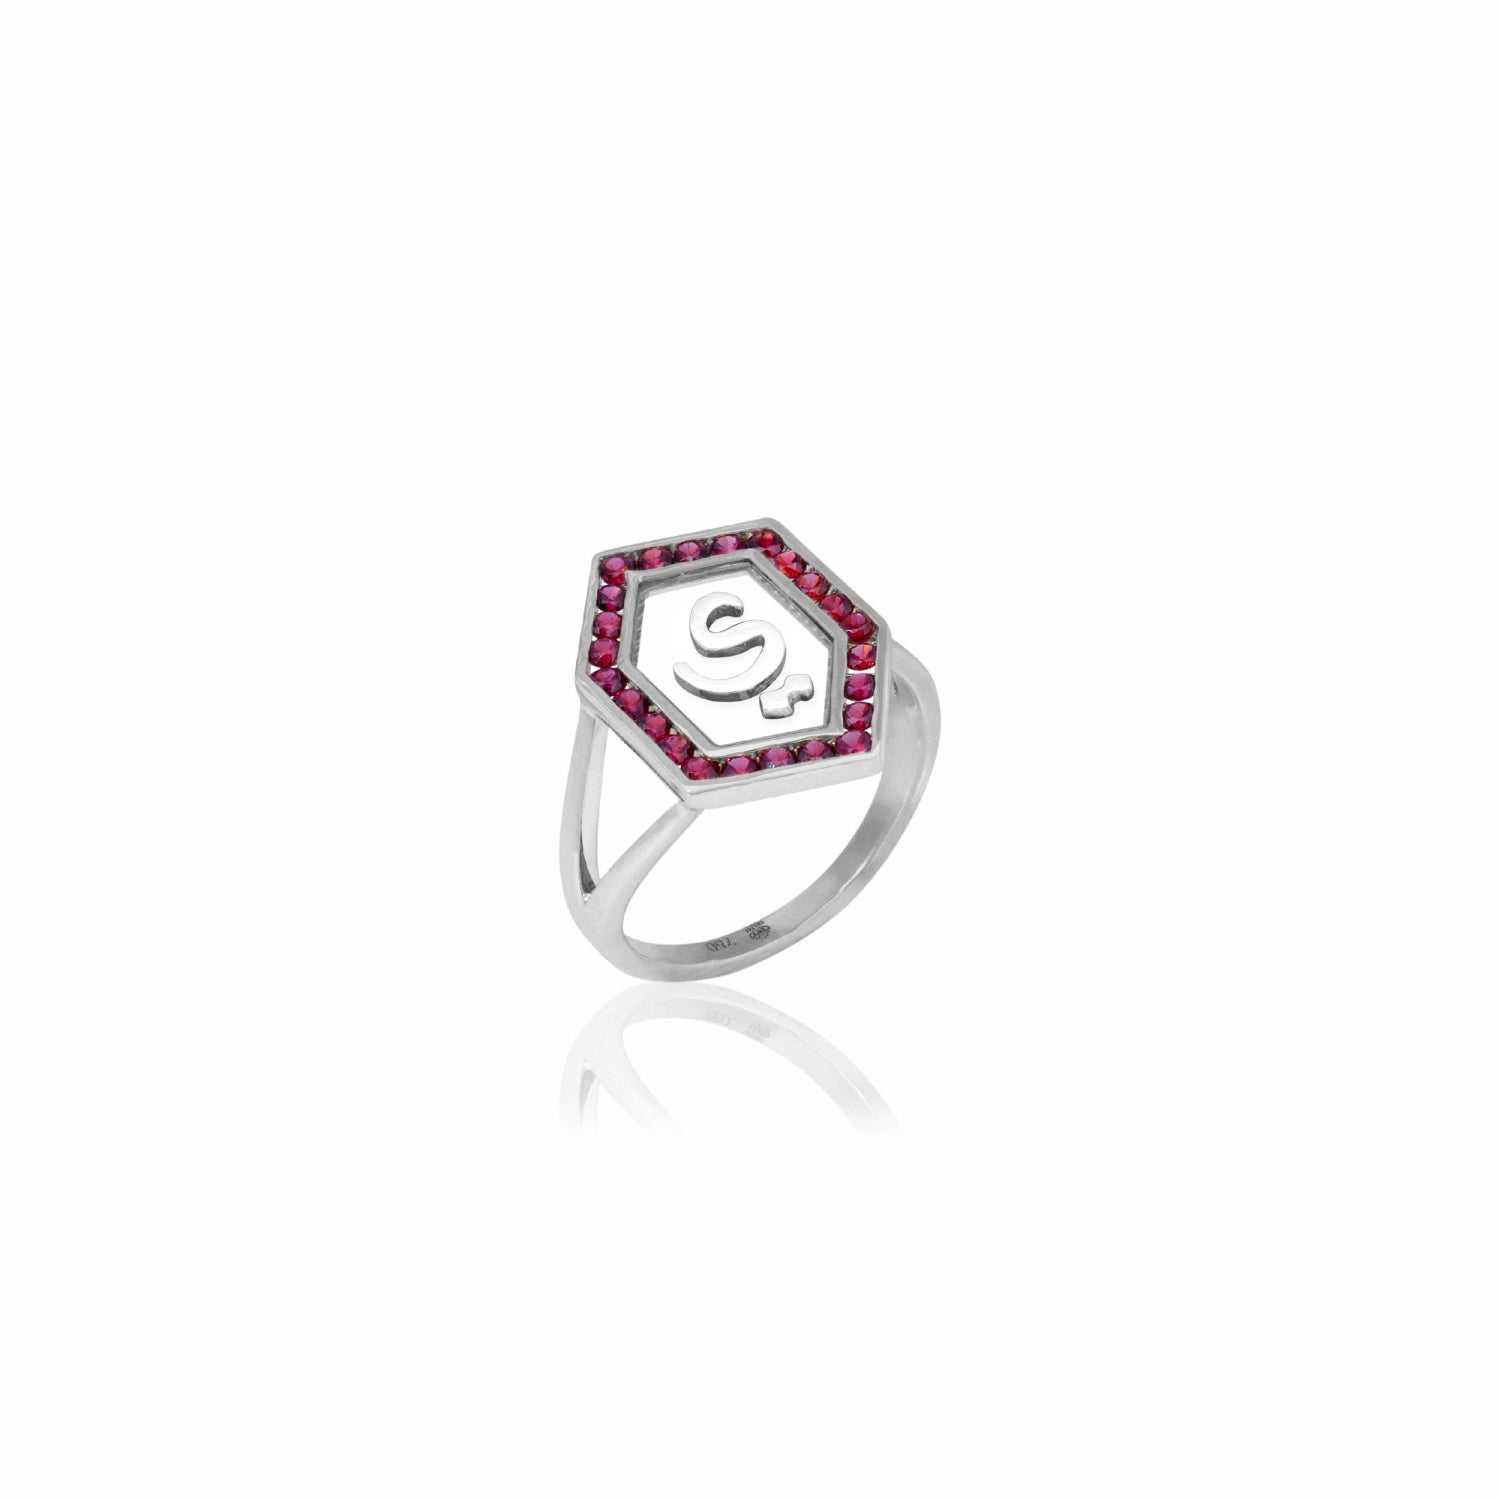 Qamoos 1.0 Letter ي Ruby Ring in White Gold